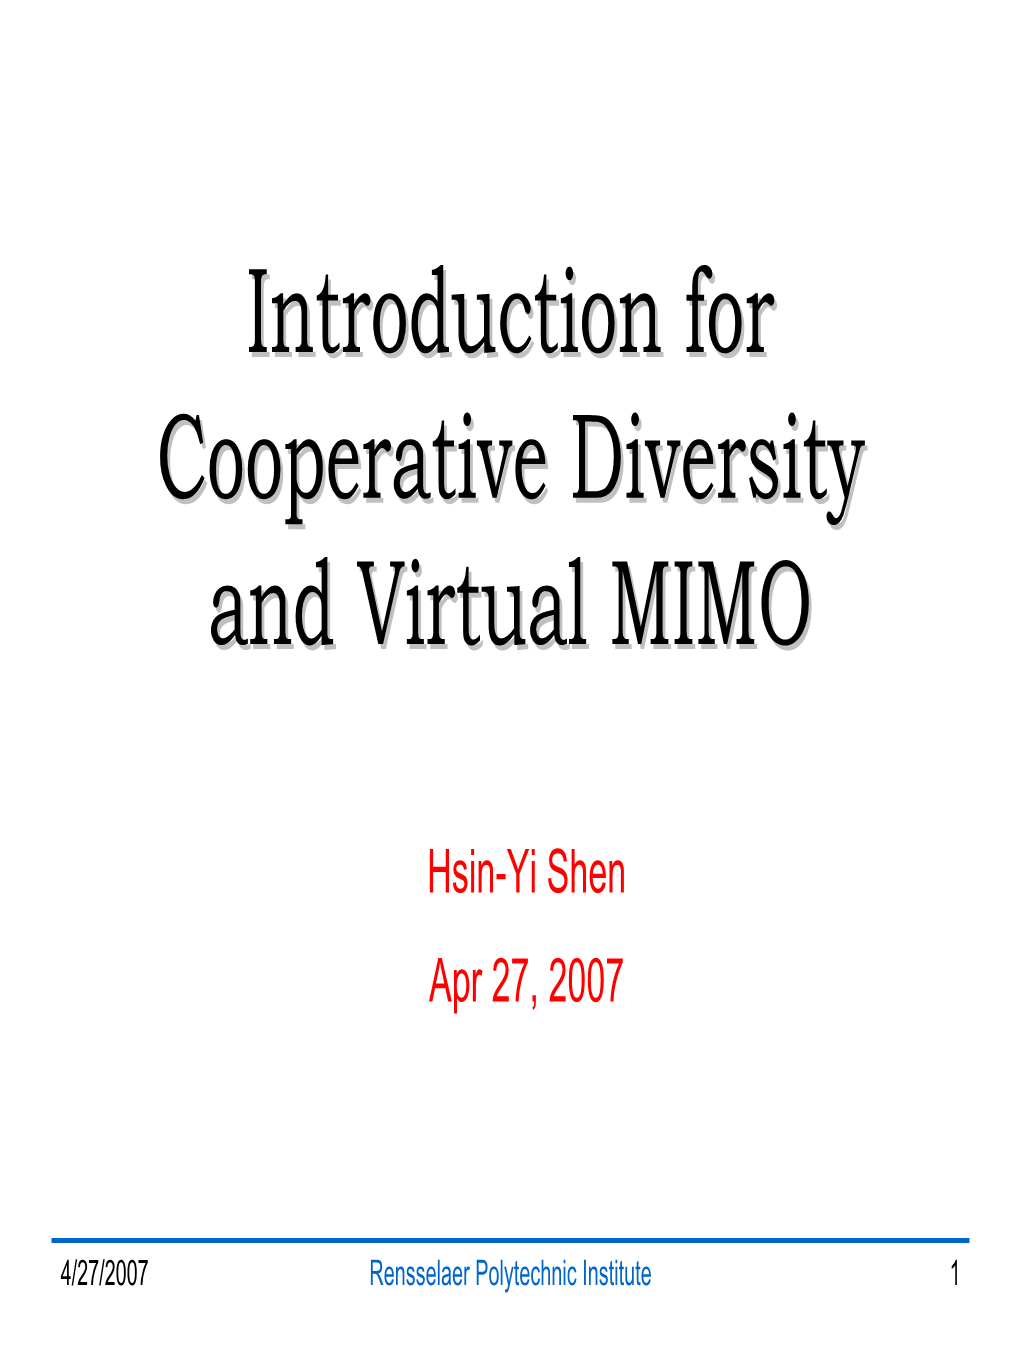 Introduction for Cooperative Diversity and Virtual MIMO